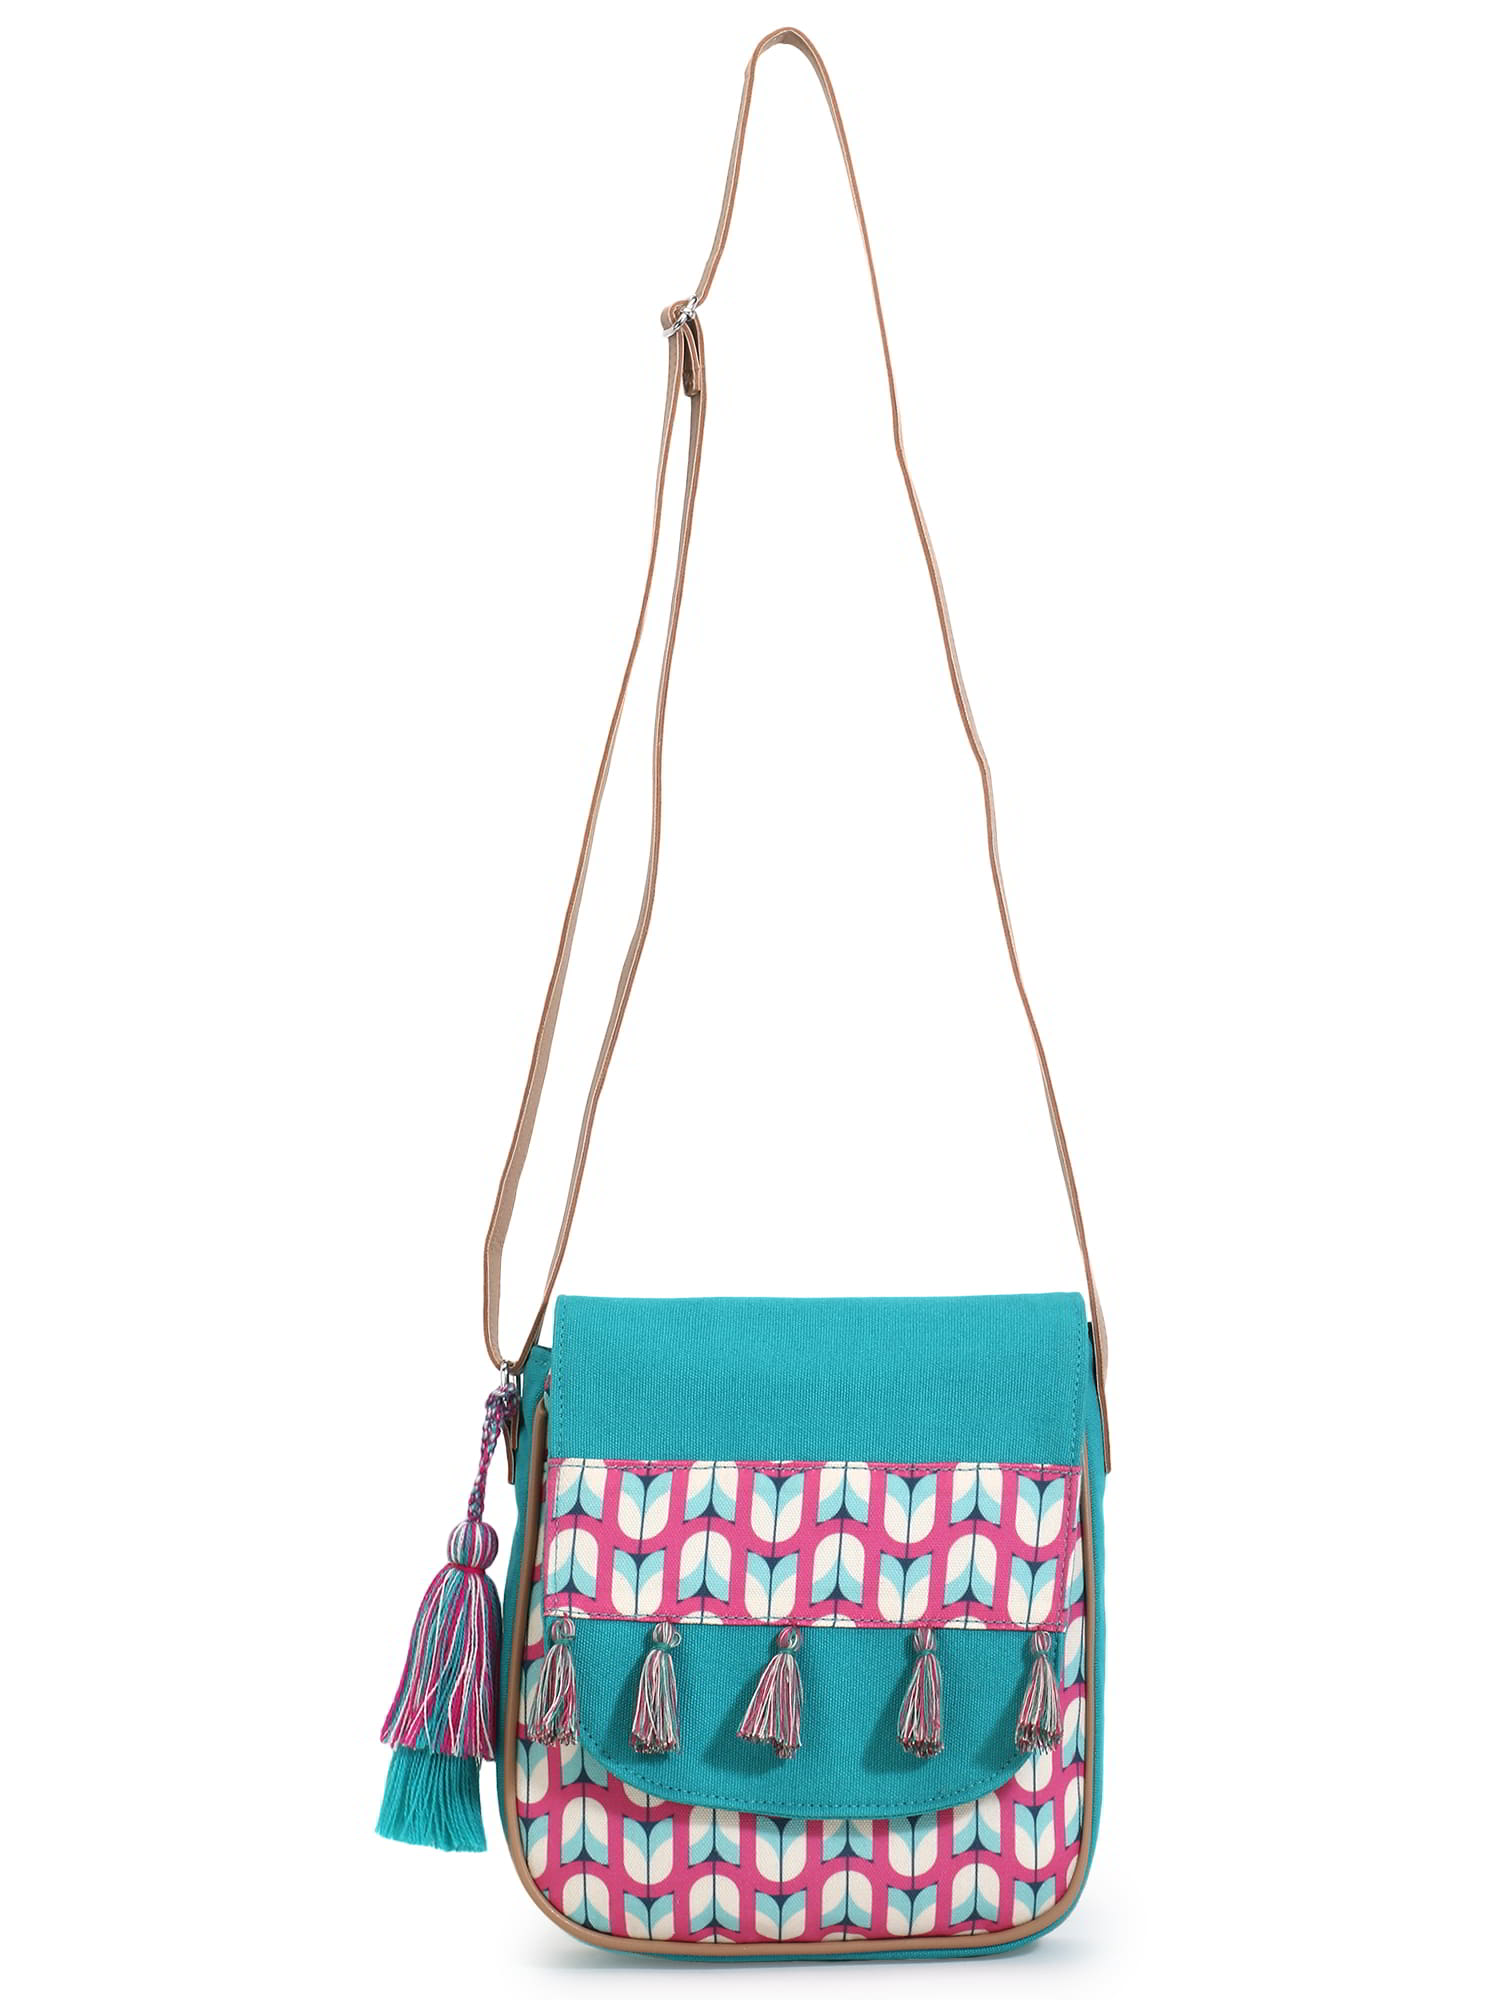 Buy Anekaant Green Canvas Shoulder Bag at Best Prices in India - Snapdeal